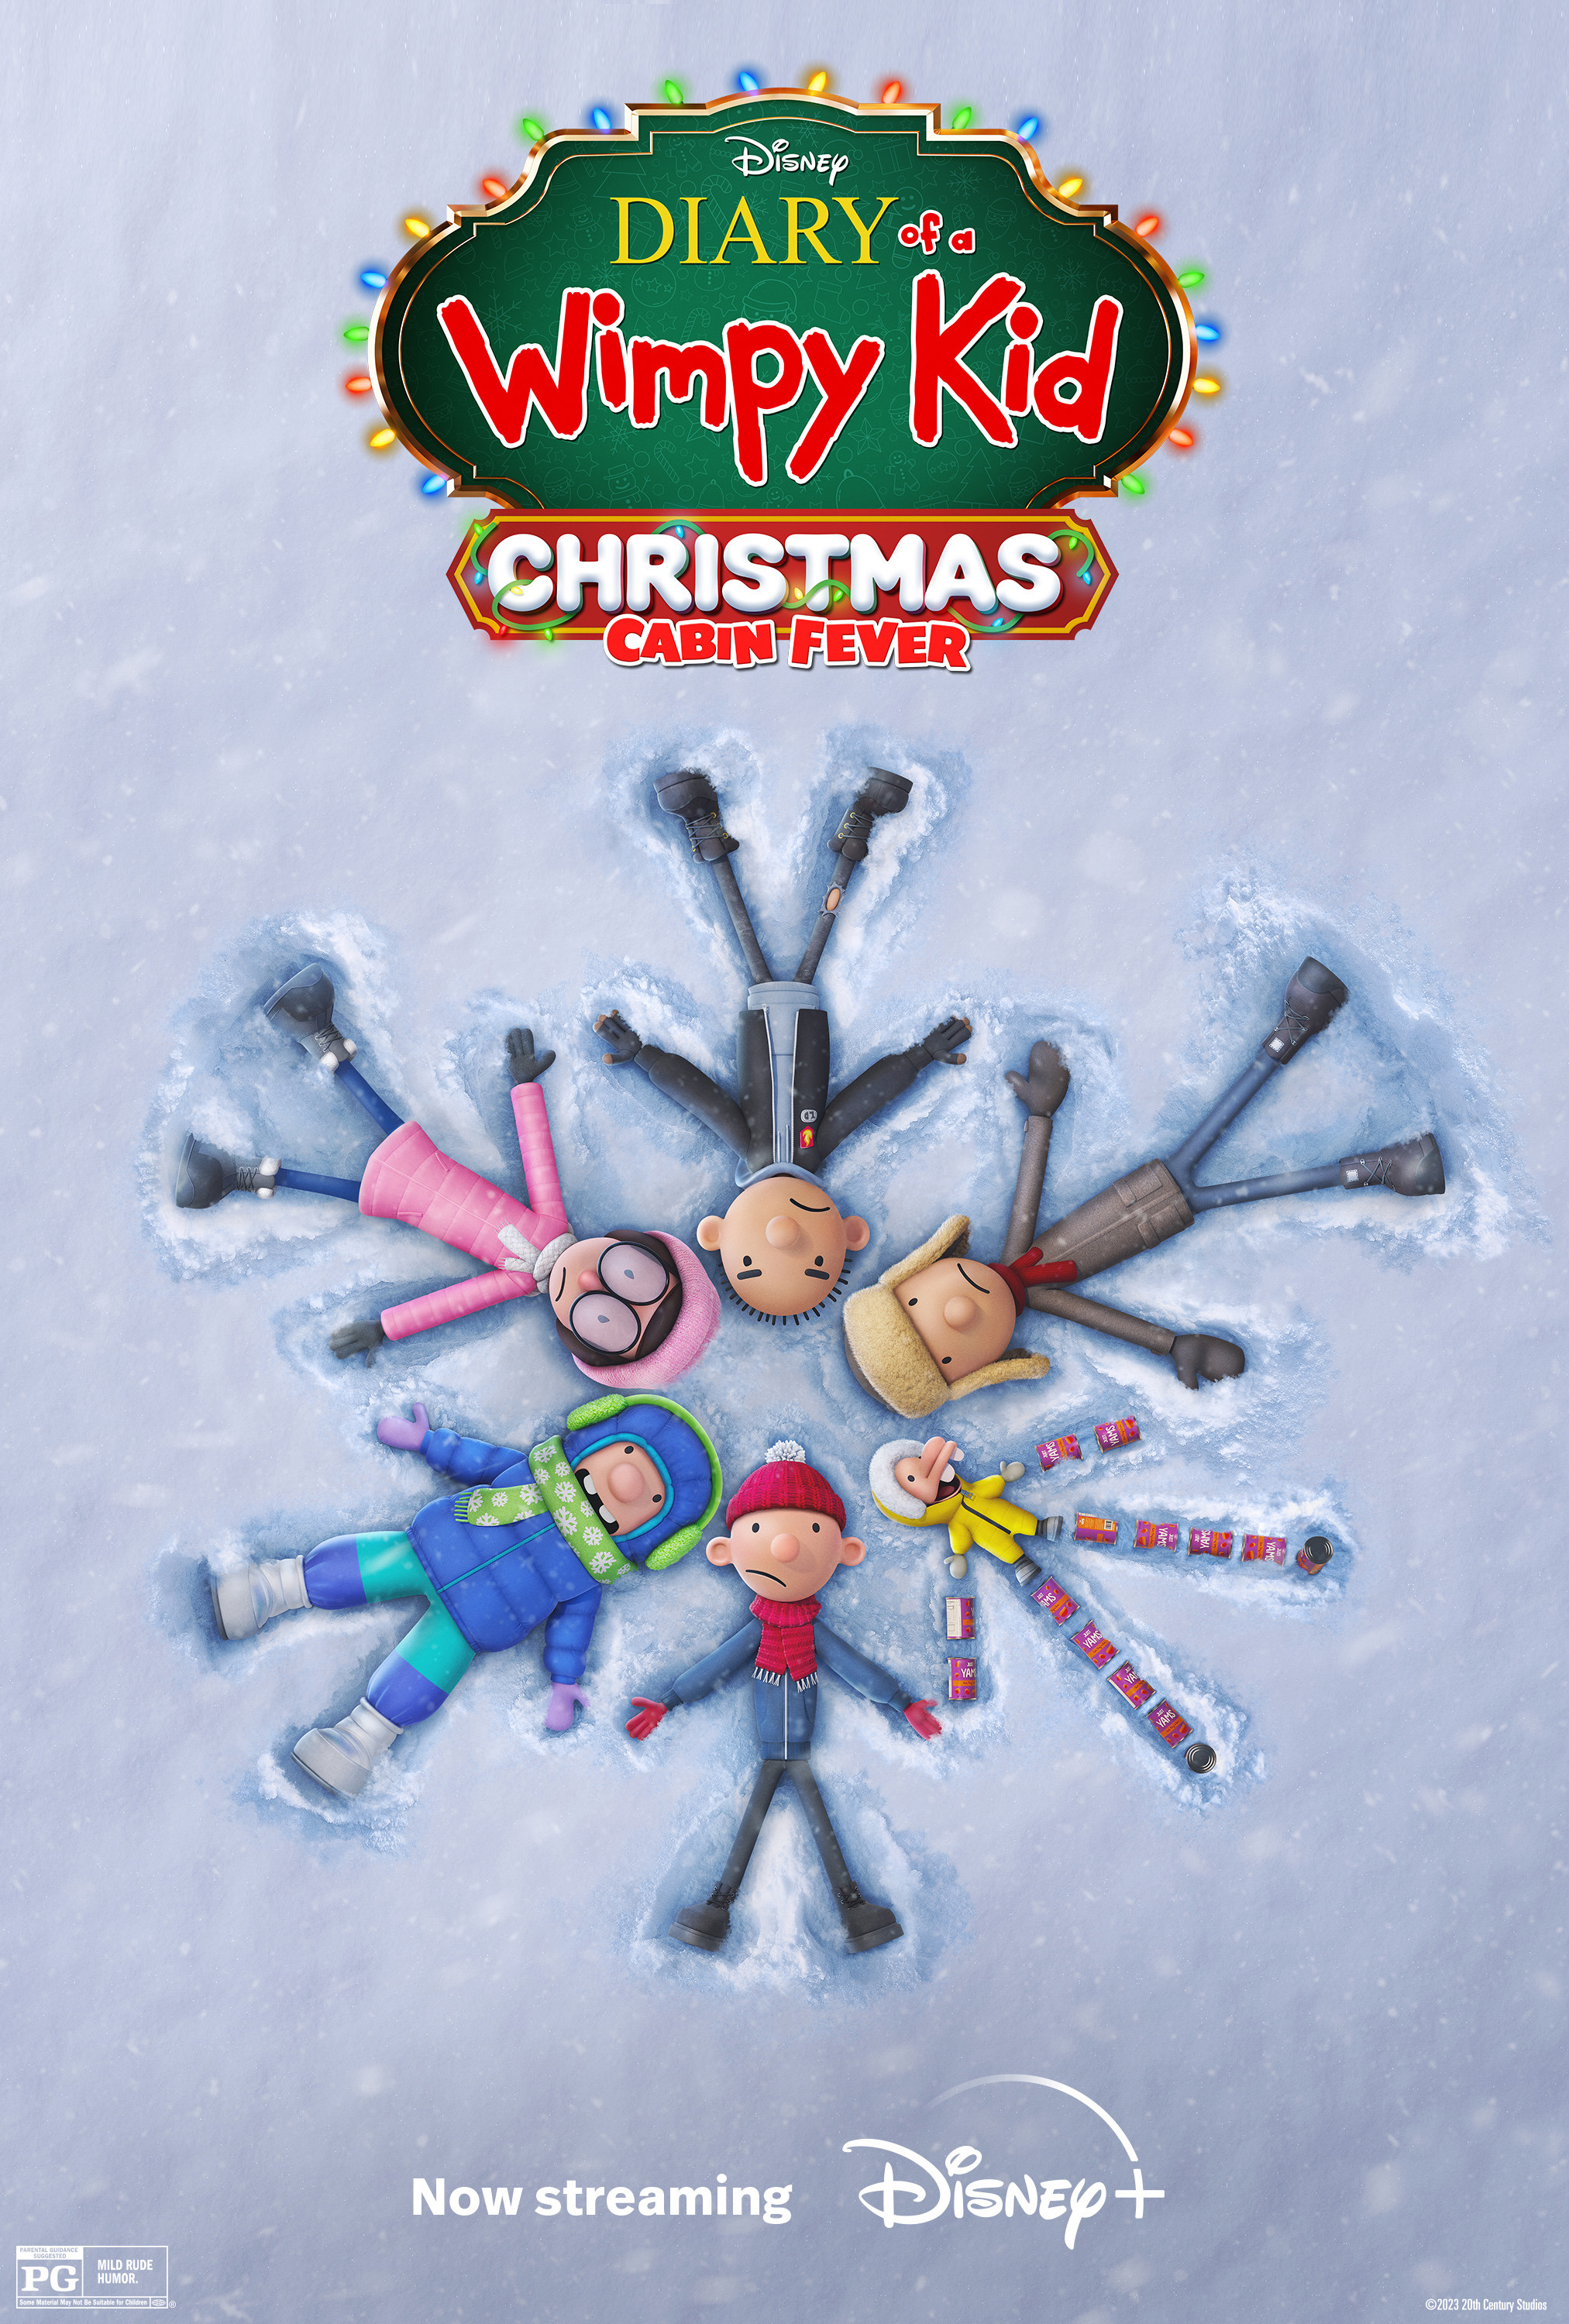 Mega Sized Movie Poster Image for Diary of a Wimpy Kid Christmas: Cabin Fever (#4 of 4)